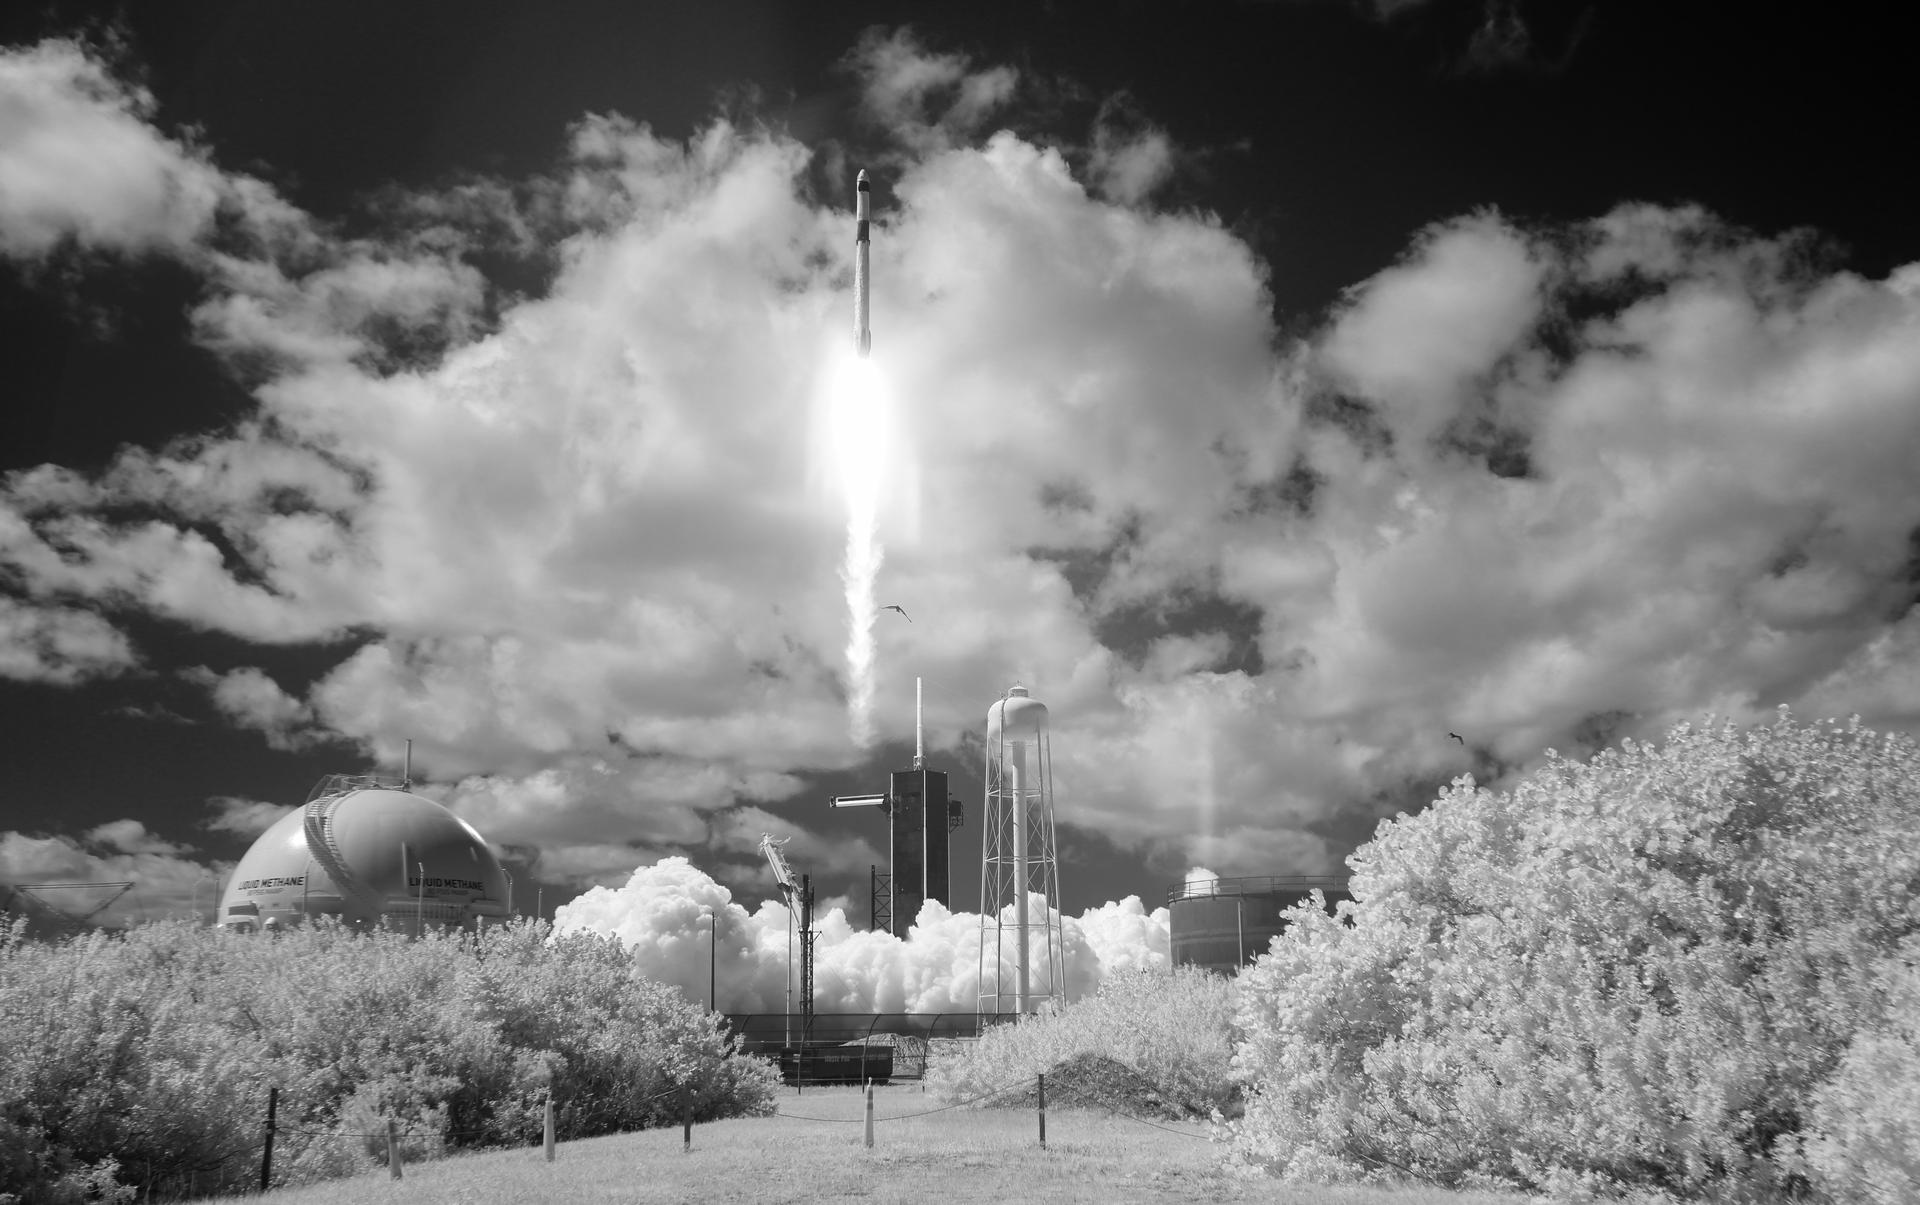 image of a rocket launching into the sky